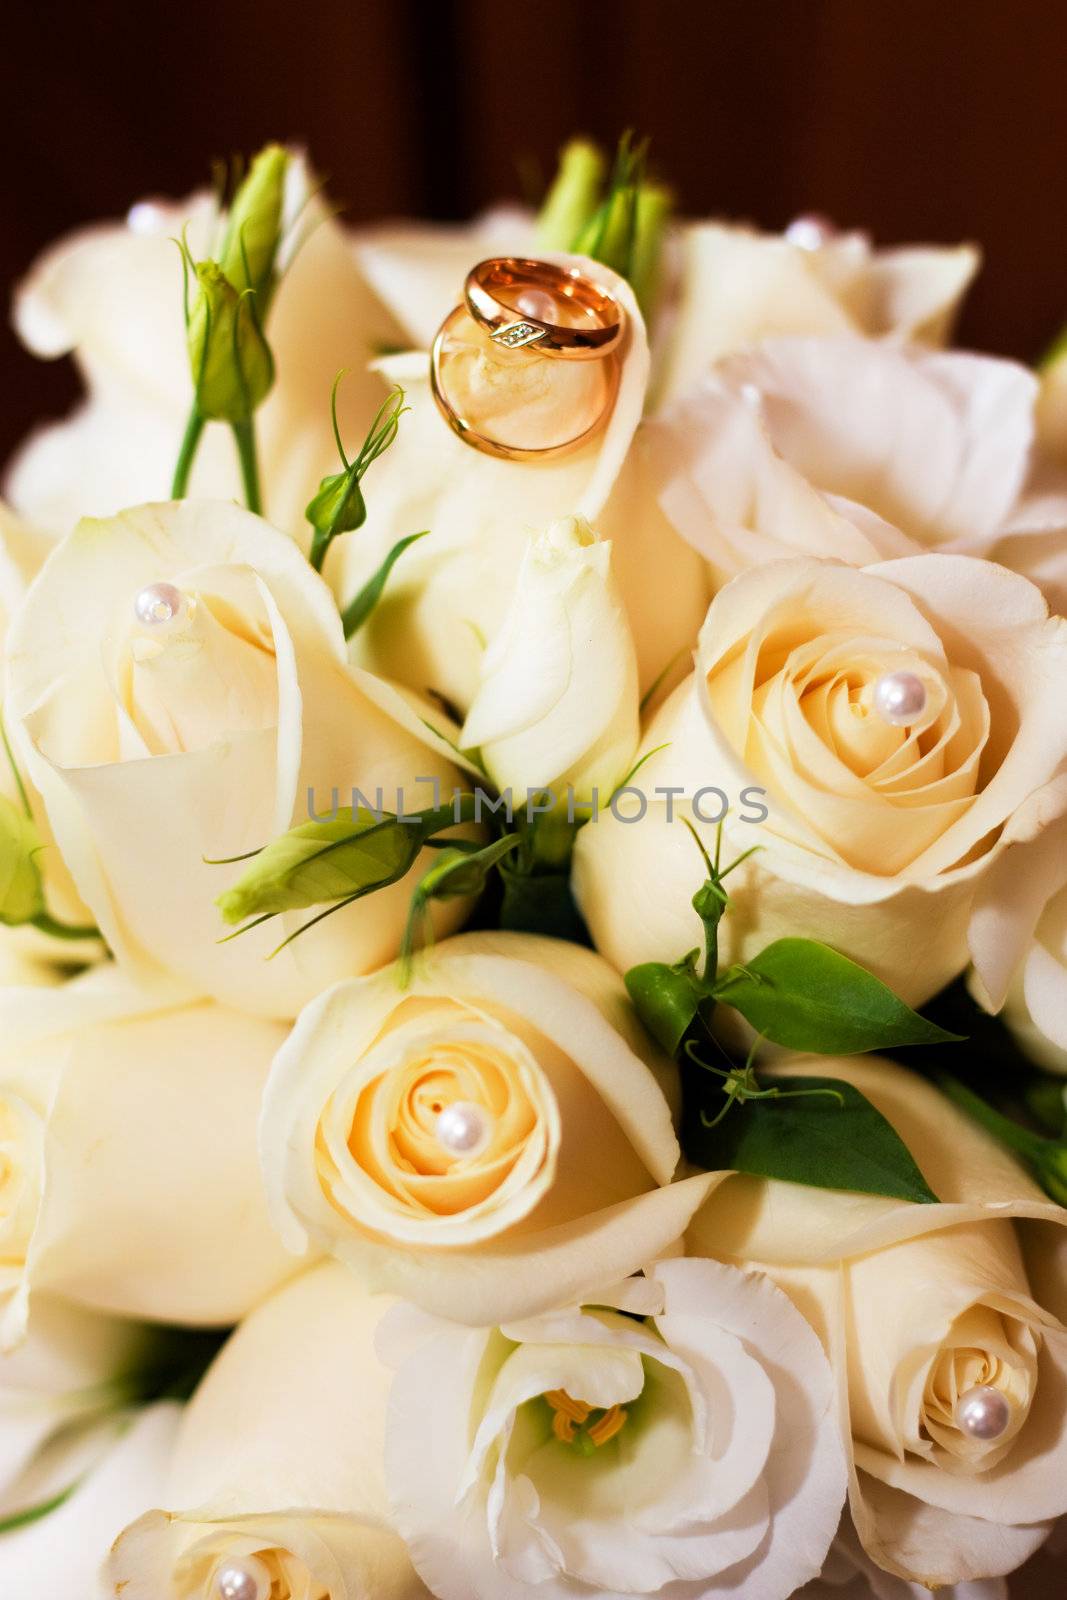 ring on the wedding bouquet